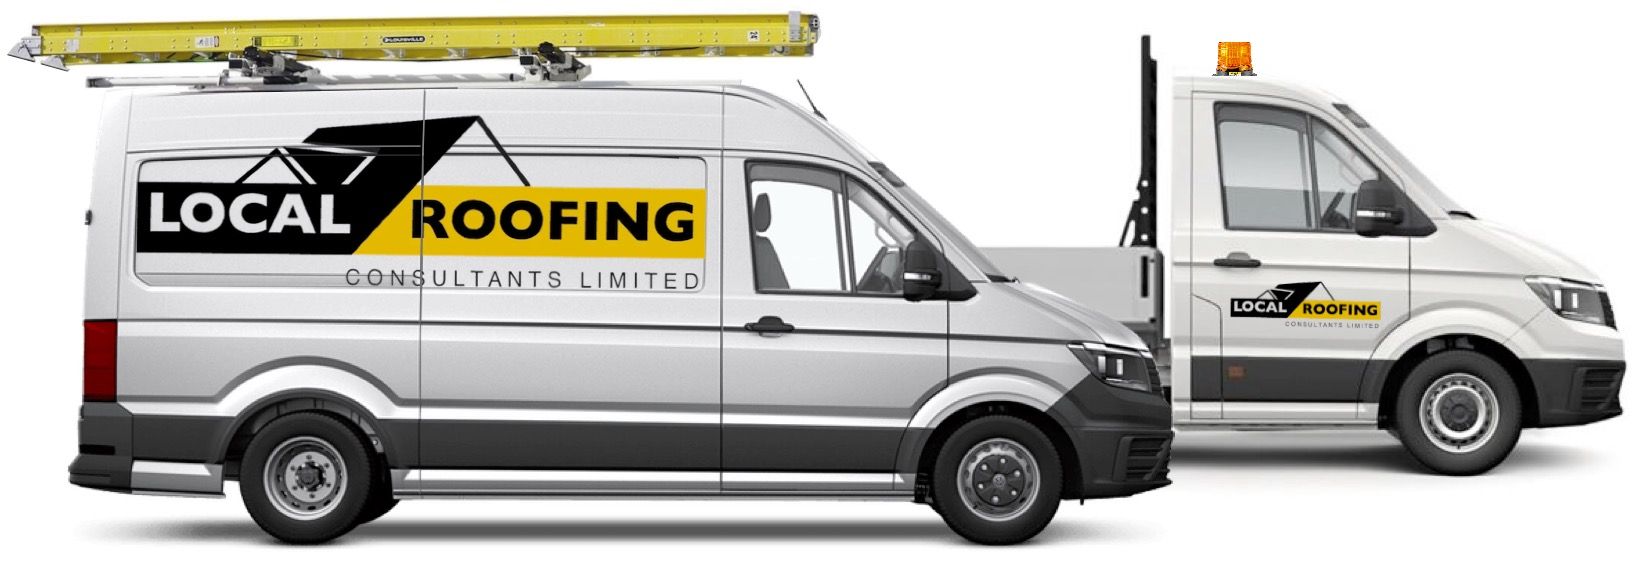 Local Roofing Consultants Limited work in Woking and throughout Surrey